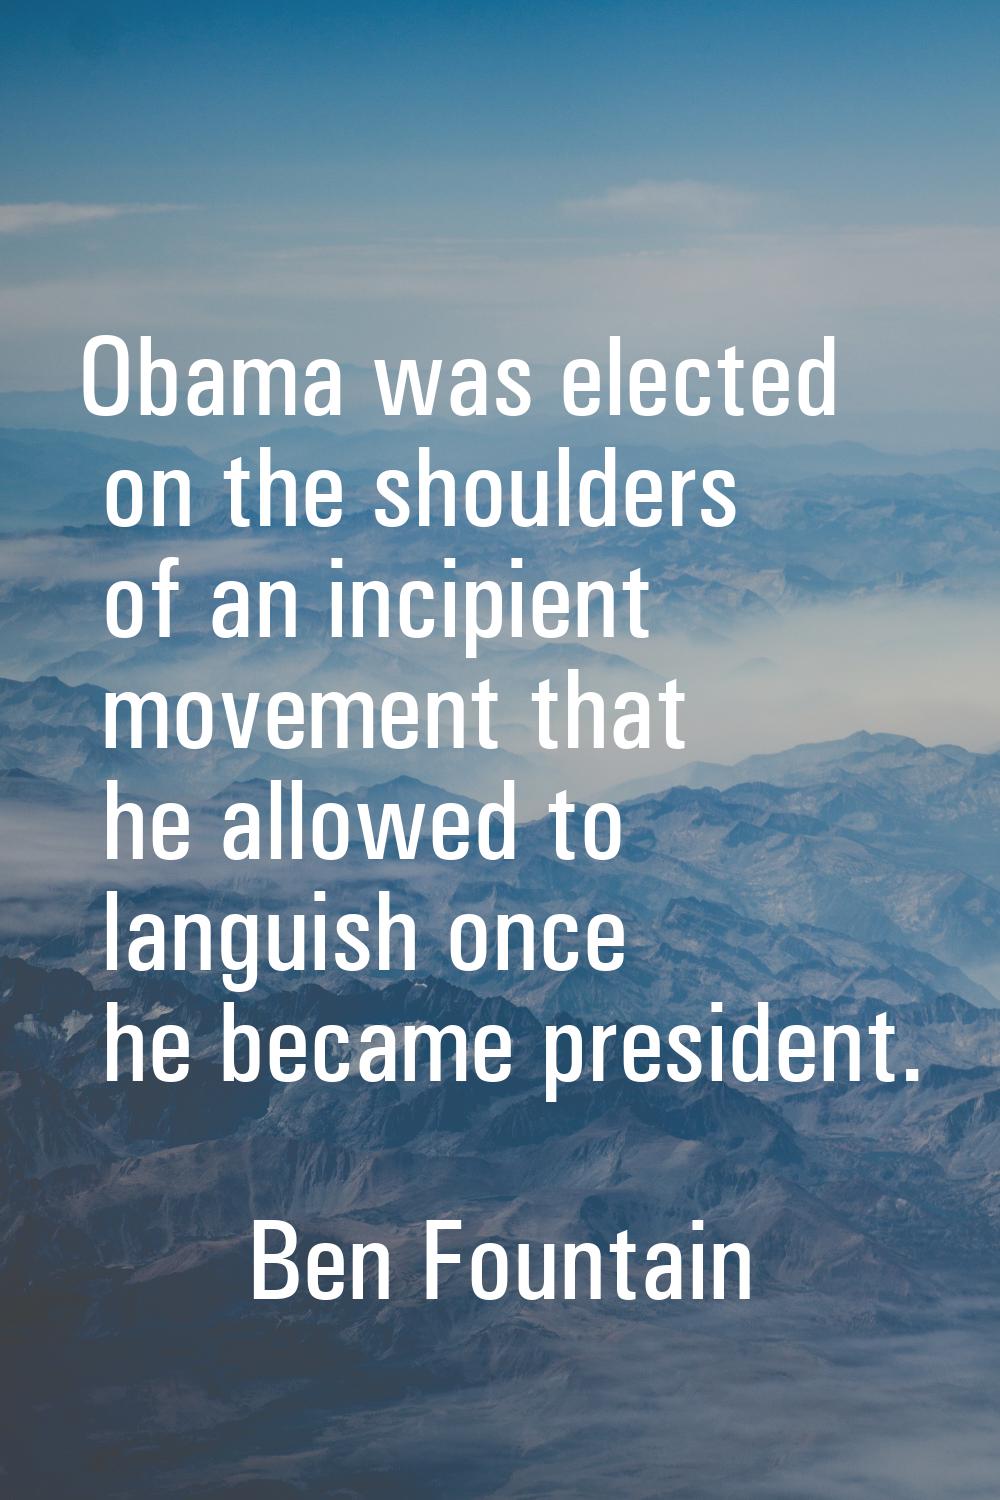 Obama was elected on the shoulders of an incipient movement that he allowed to languish once he bec